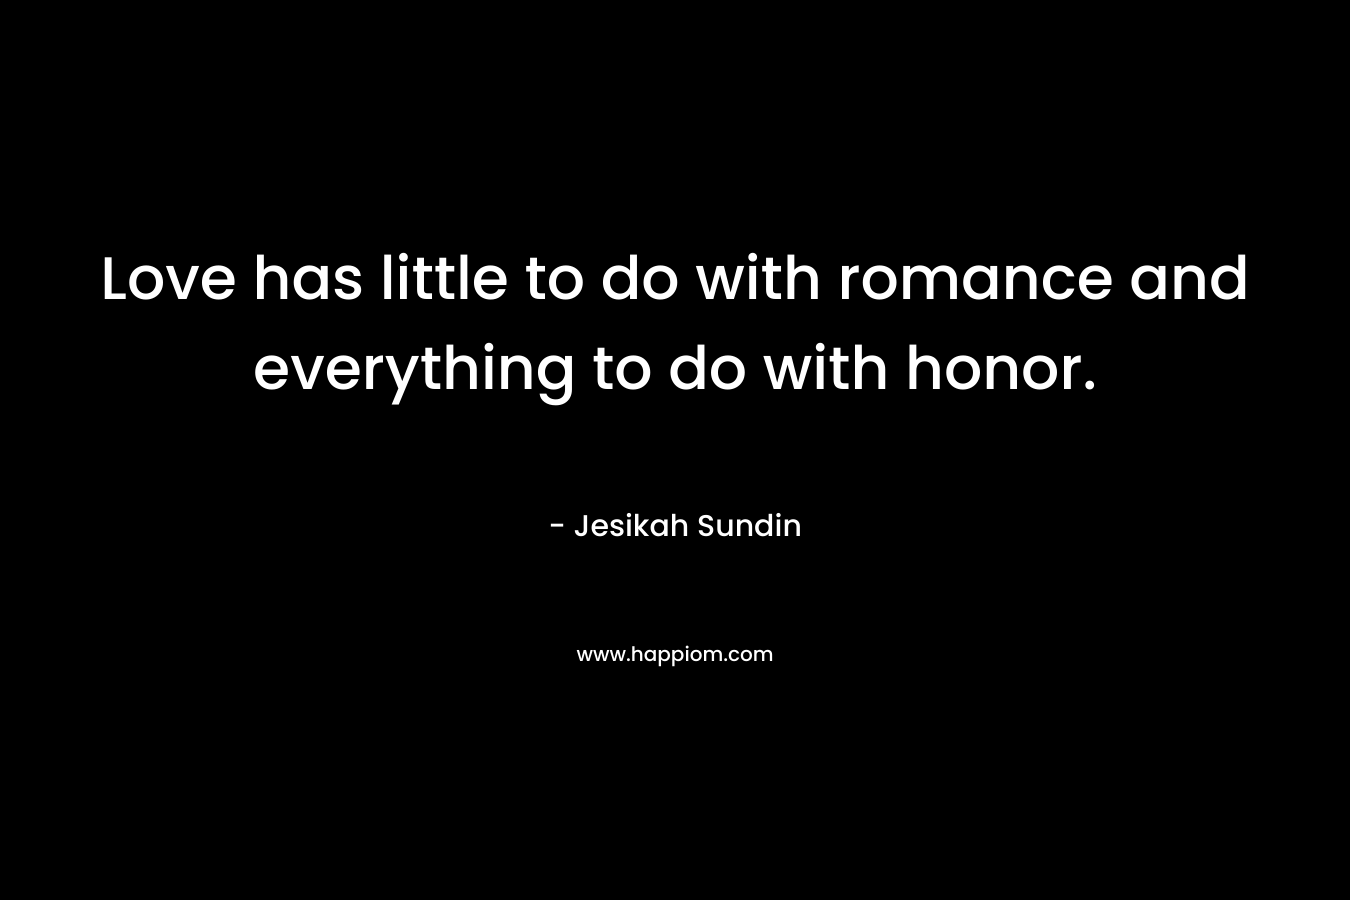 Love has little to do with romance and everything to do with honor.